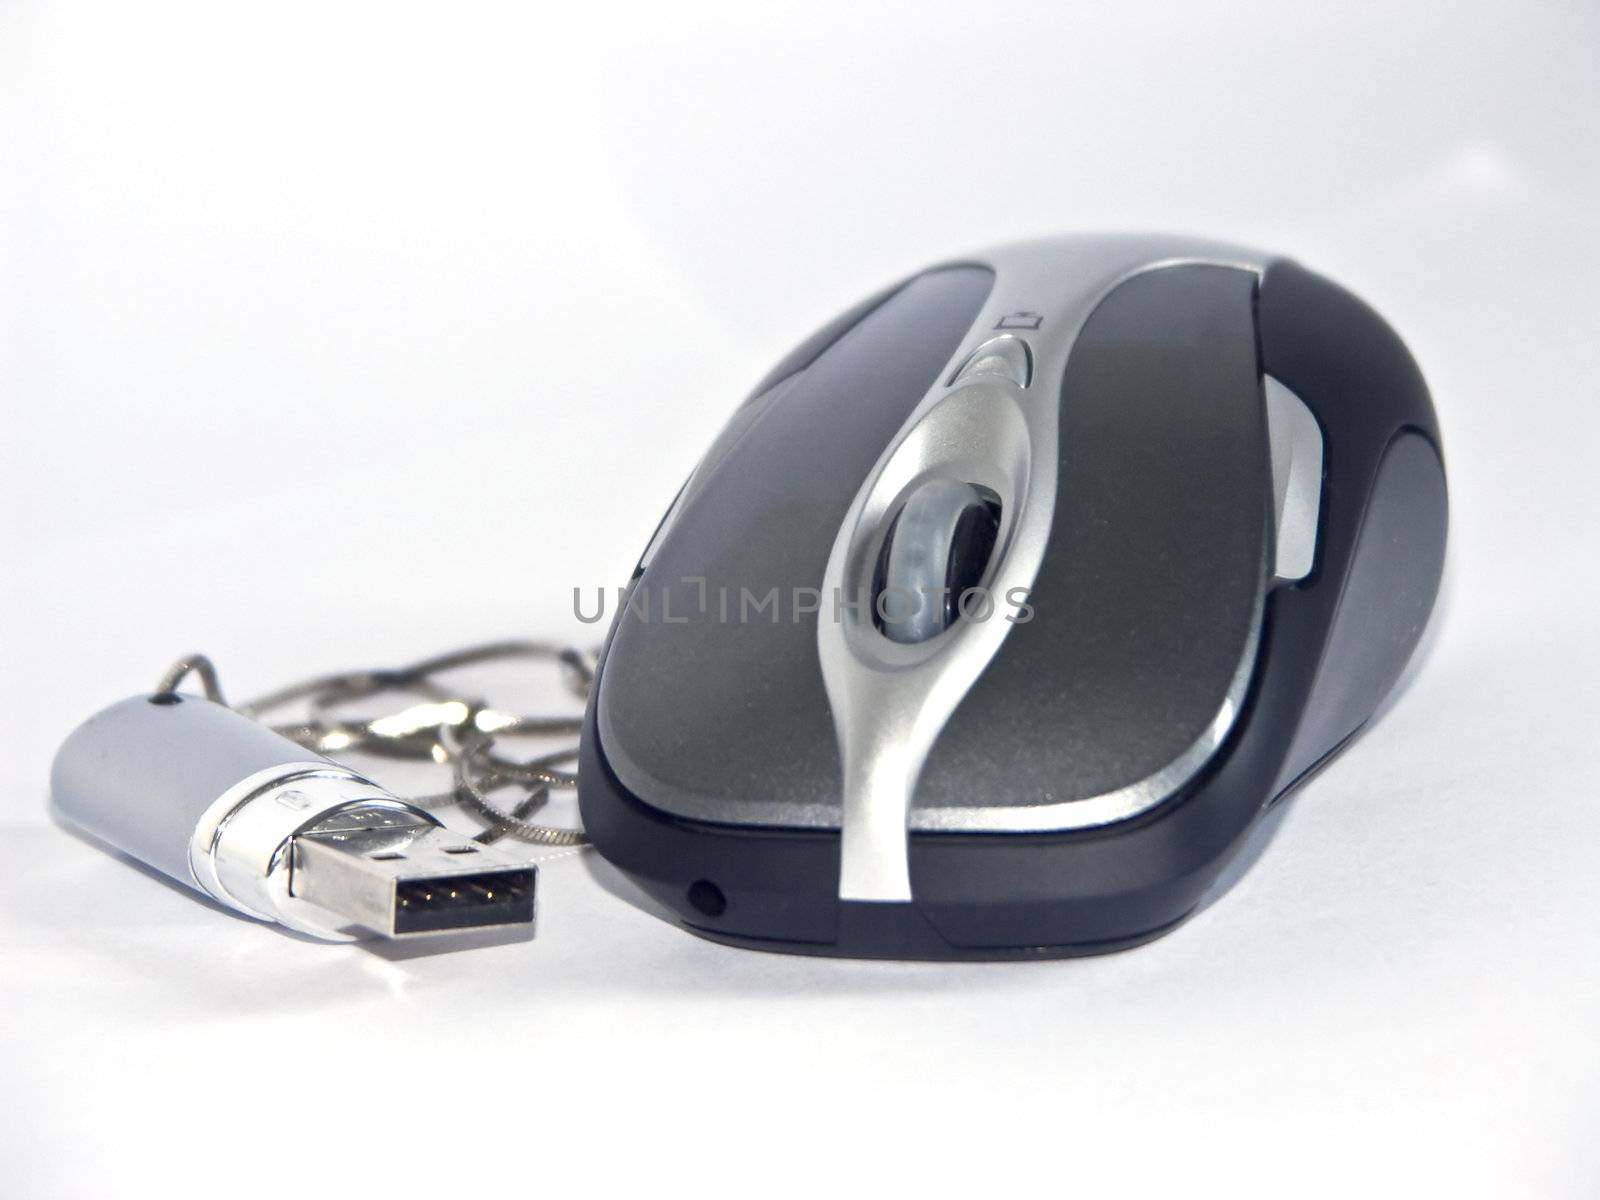 The image of the computer mouse and flash on a homogeneous background